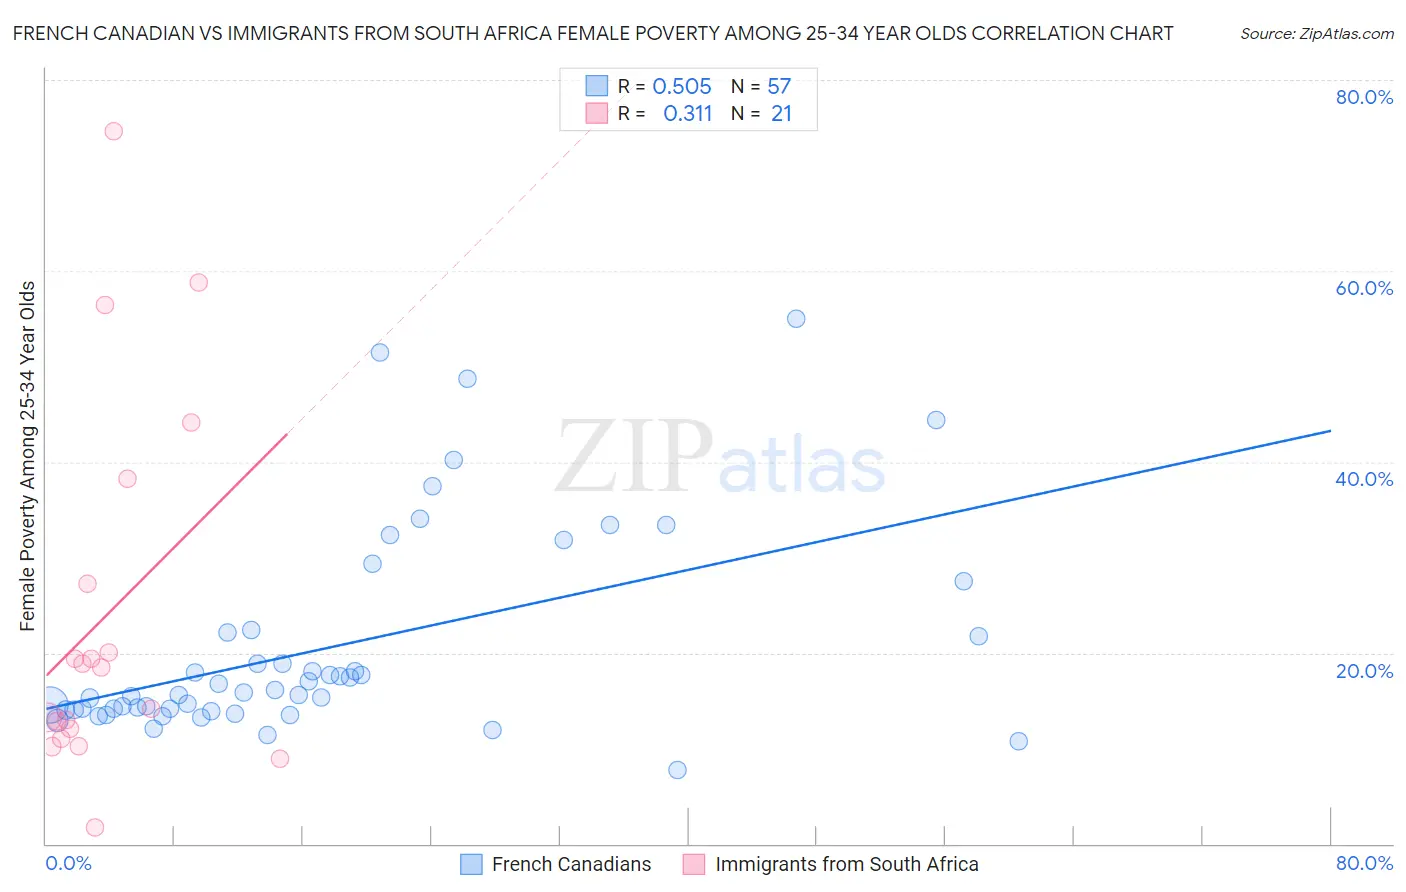 French Canadian vs Immigrants from South Africa Female Poverty Among 25-34 Year Olds